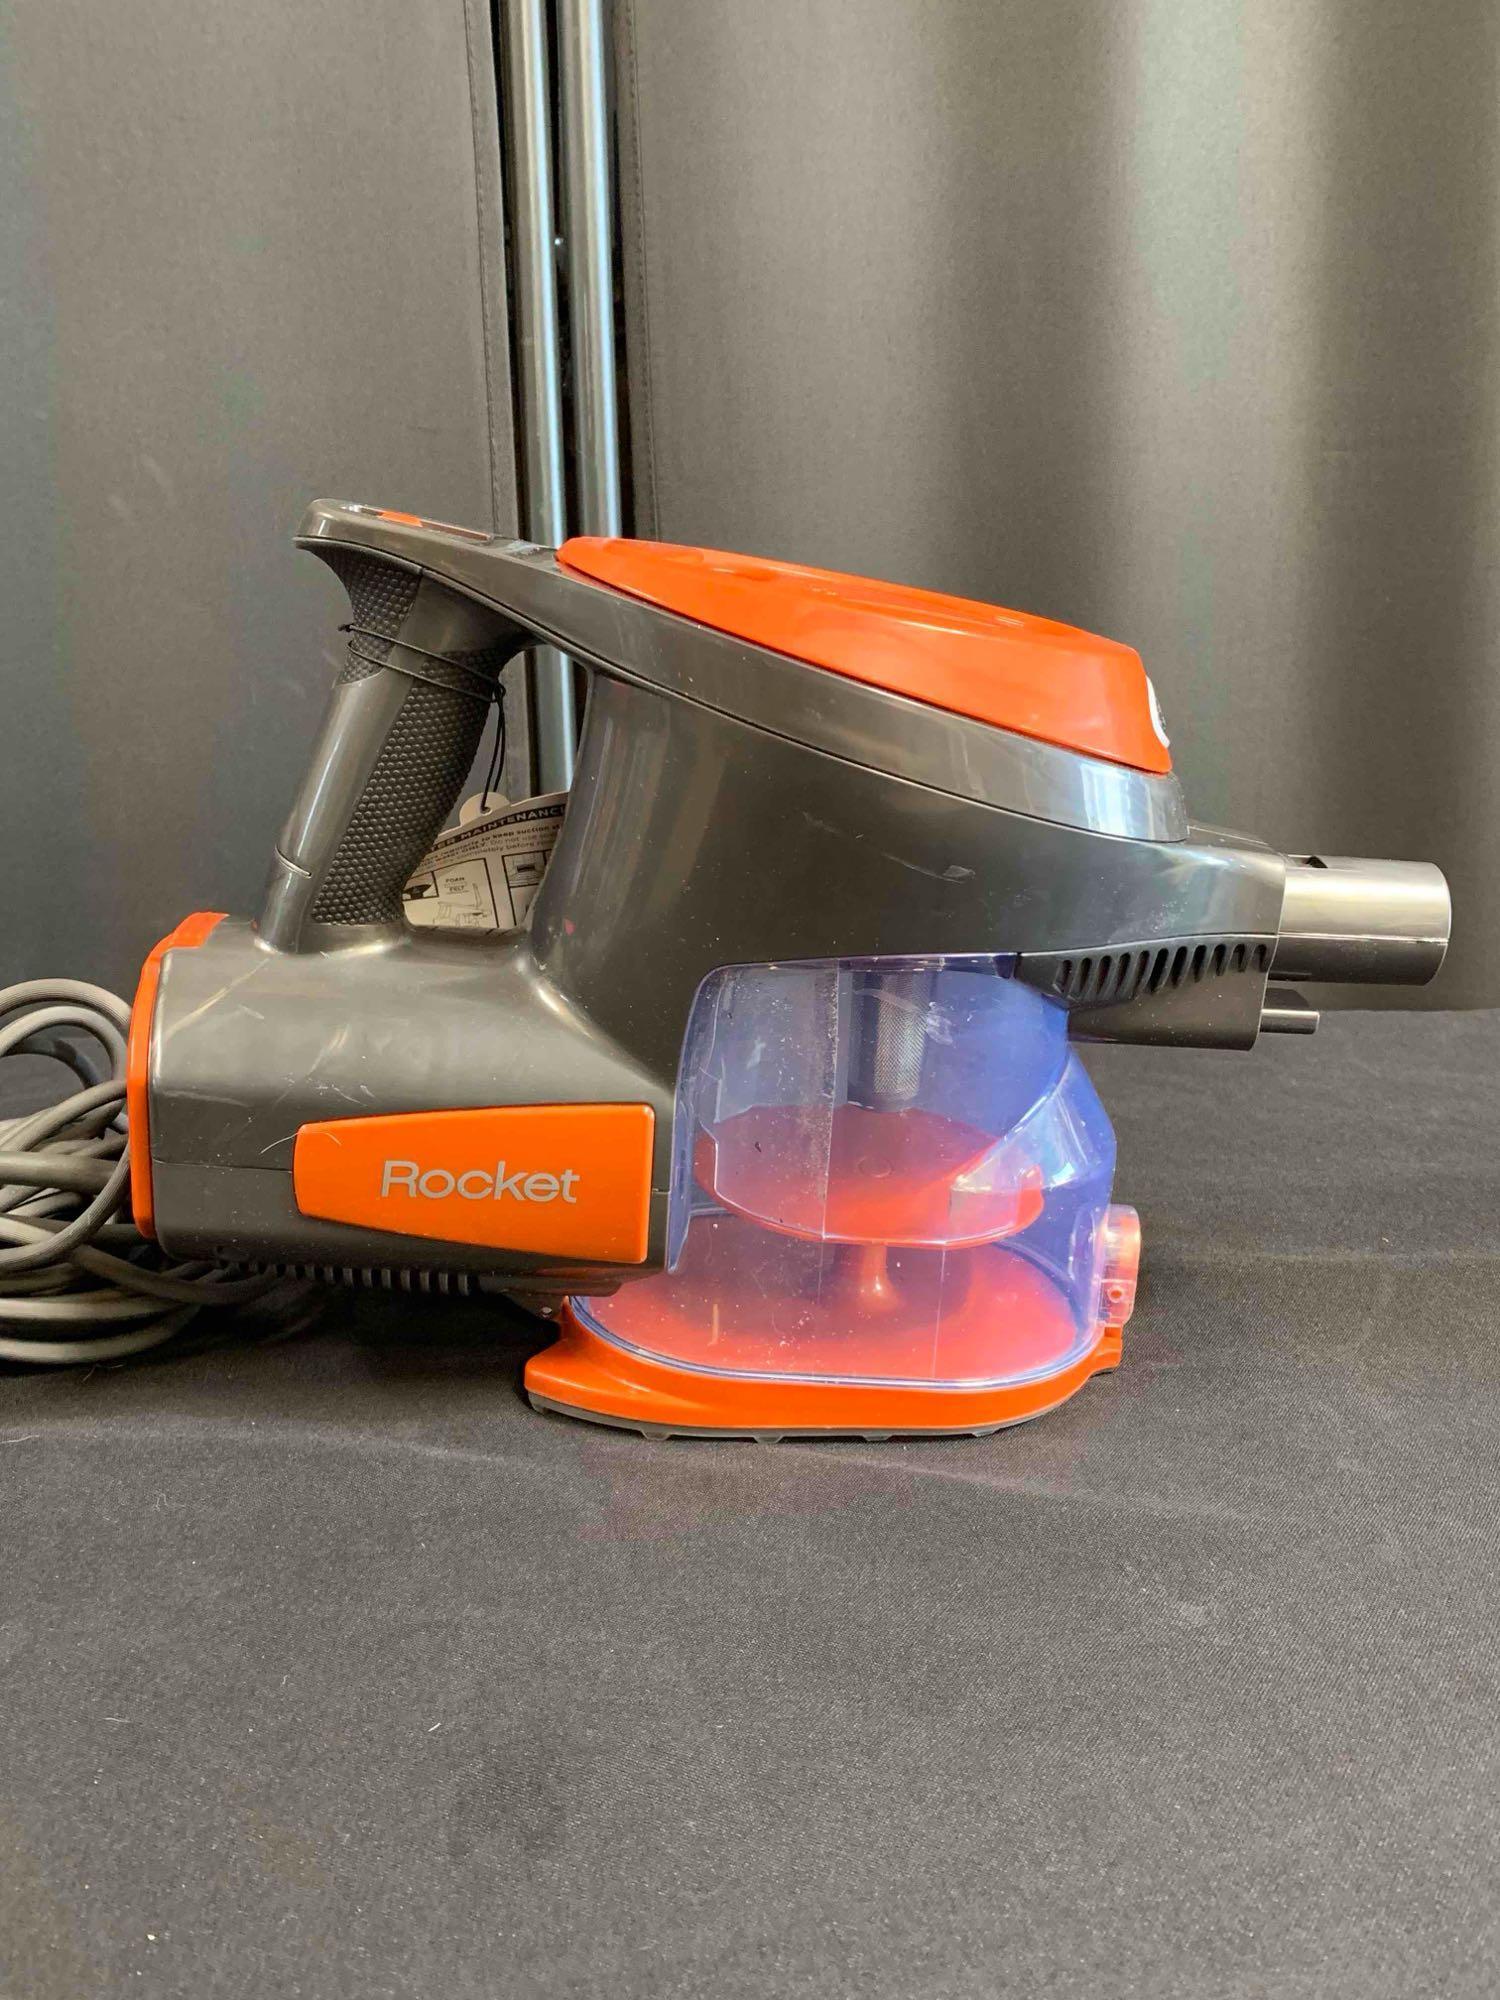 Shark HV301 Rocket Ultra-Light Corded Bagless Vacuum for Carpet and Hard Floor Cleaning with Swivel